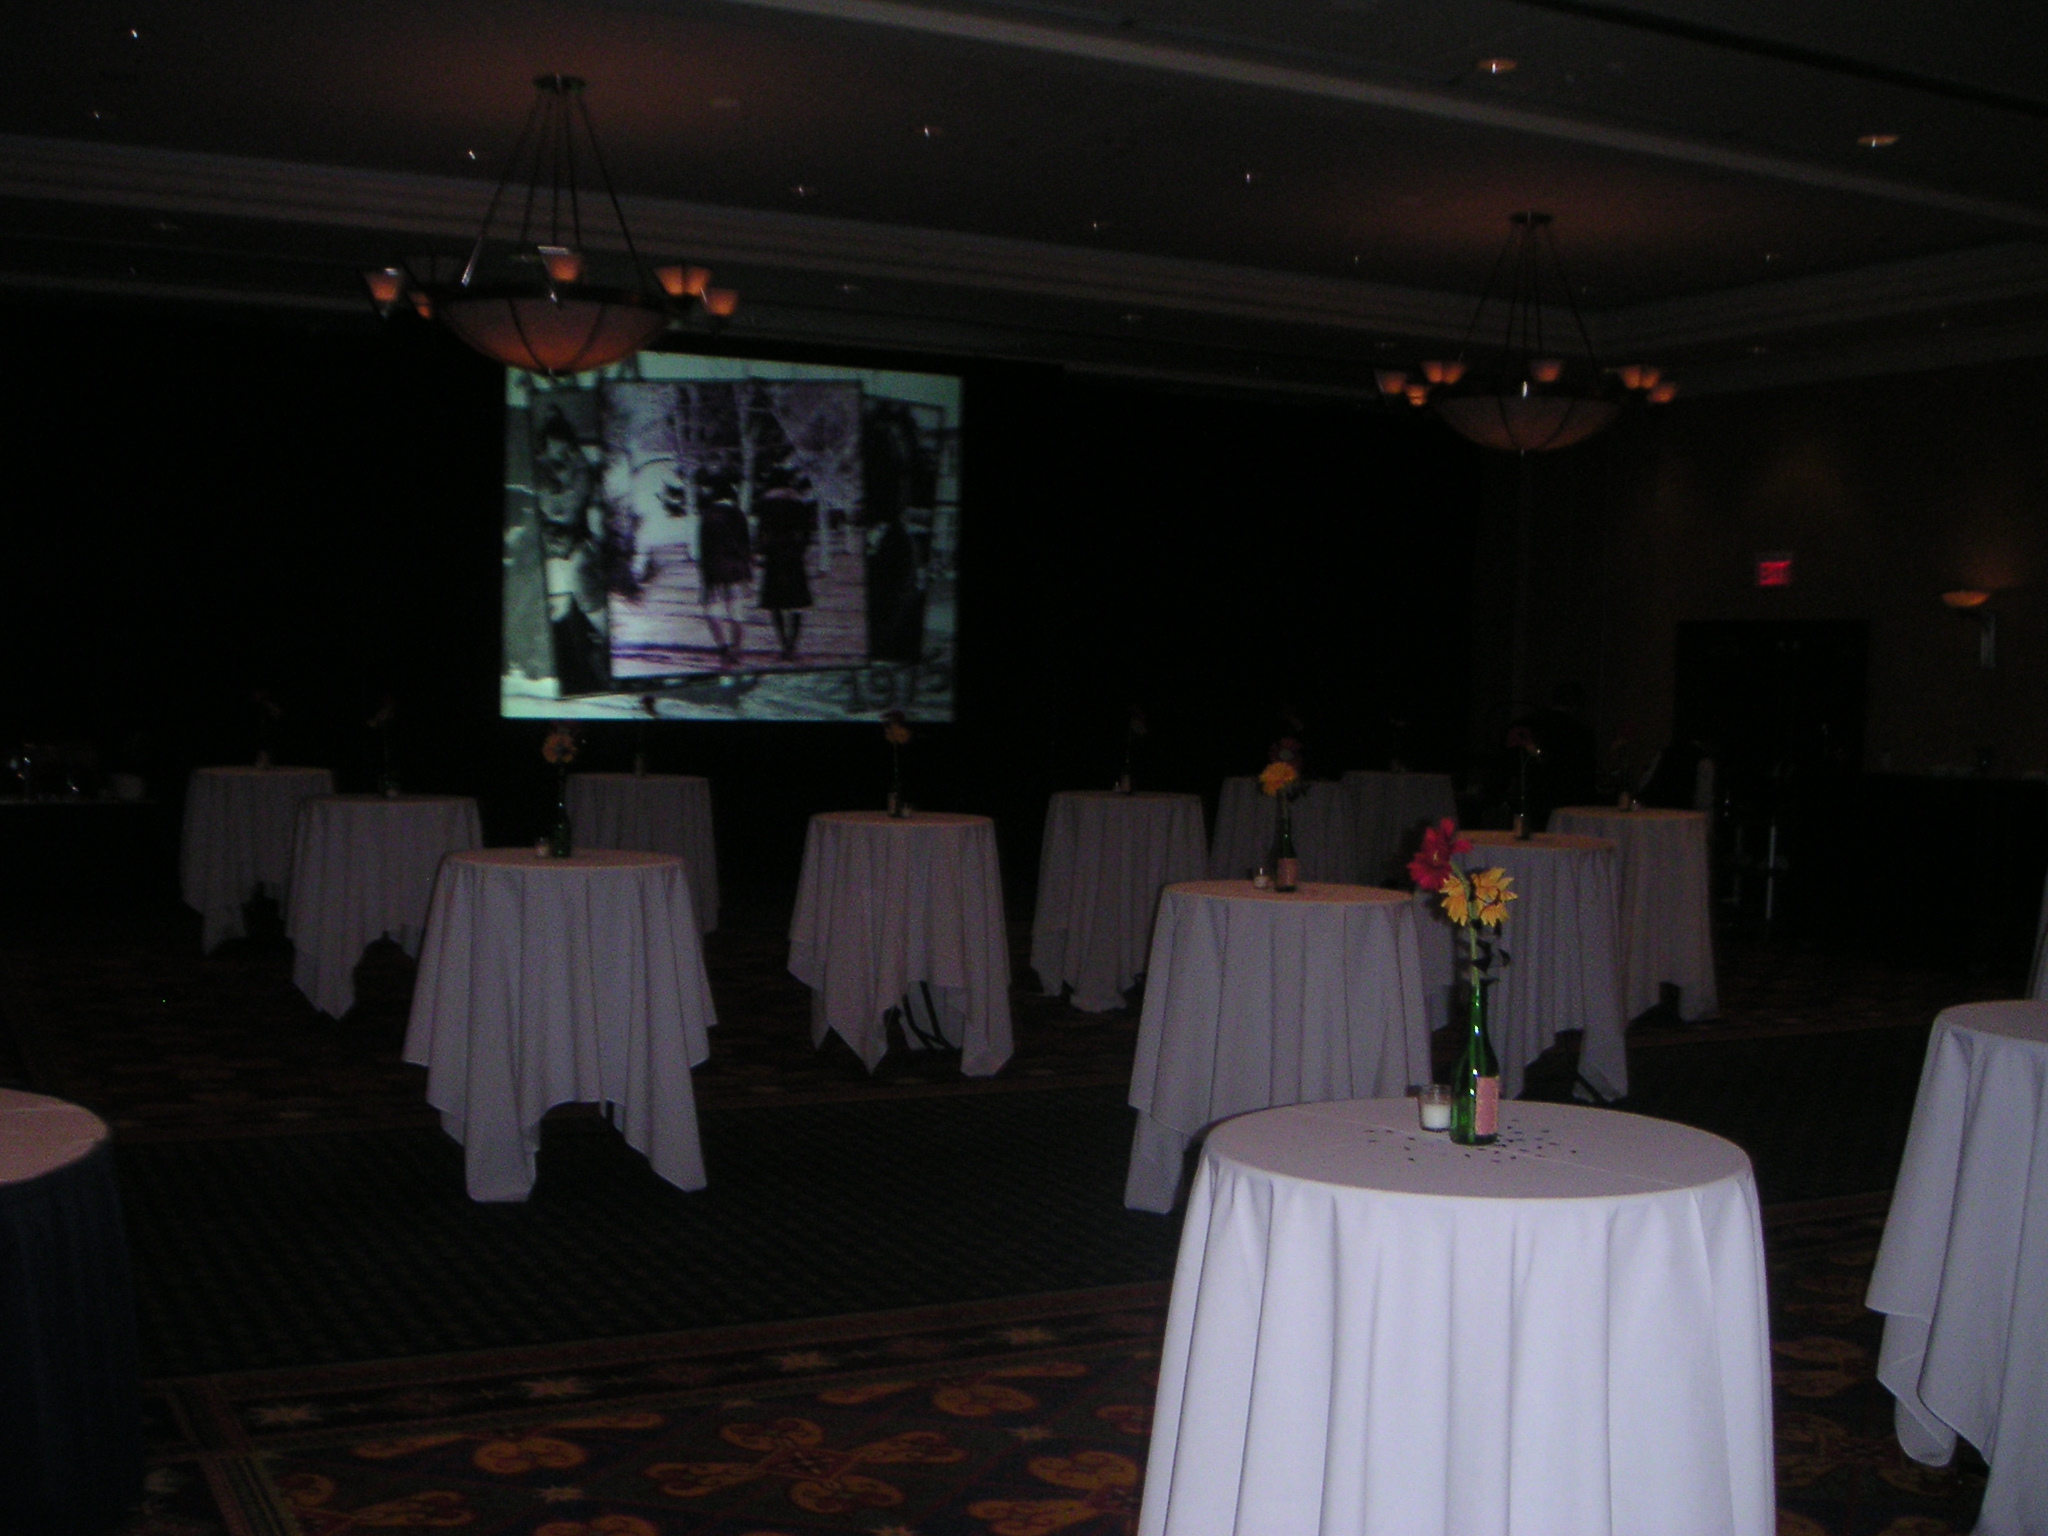 A 9' x 12' rear projection screen played a custom designed retrospective of our high school days throughout the evening 